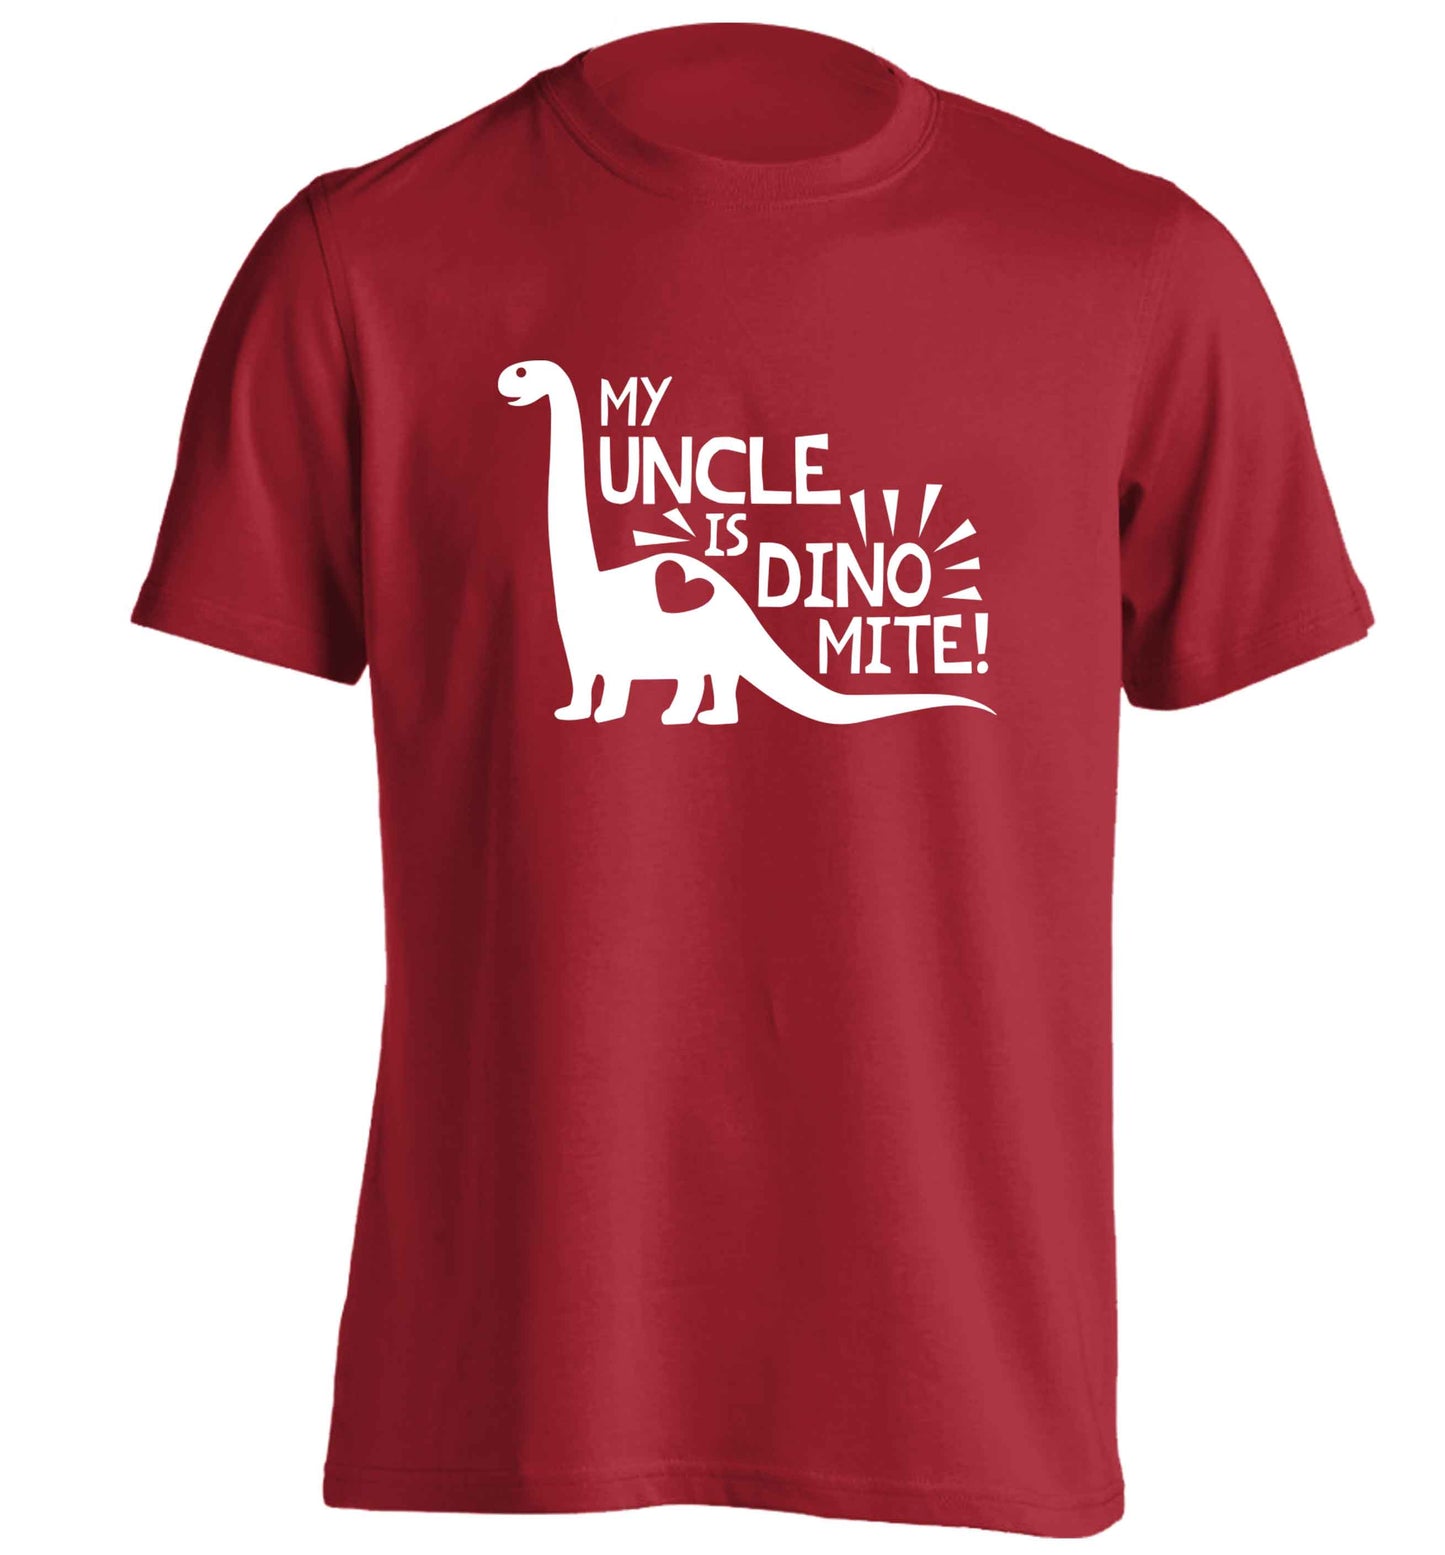 My uncle is dinomite! adults unisex red Tshirt 2XL